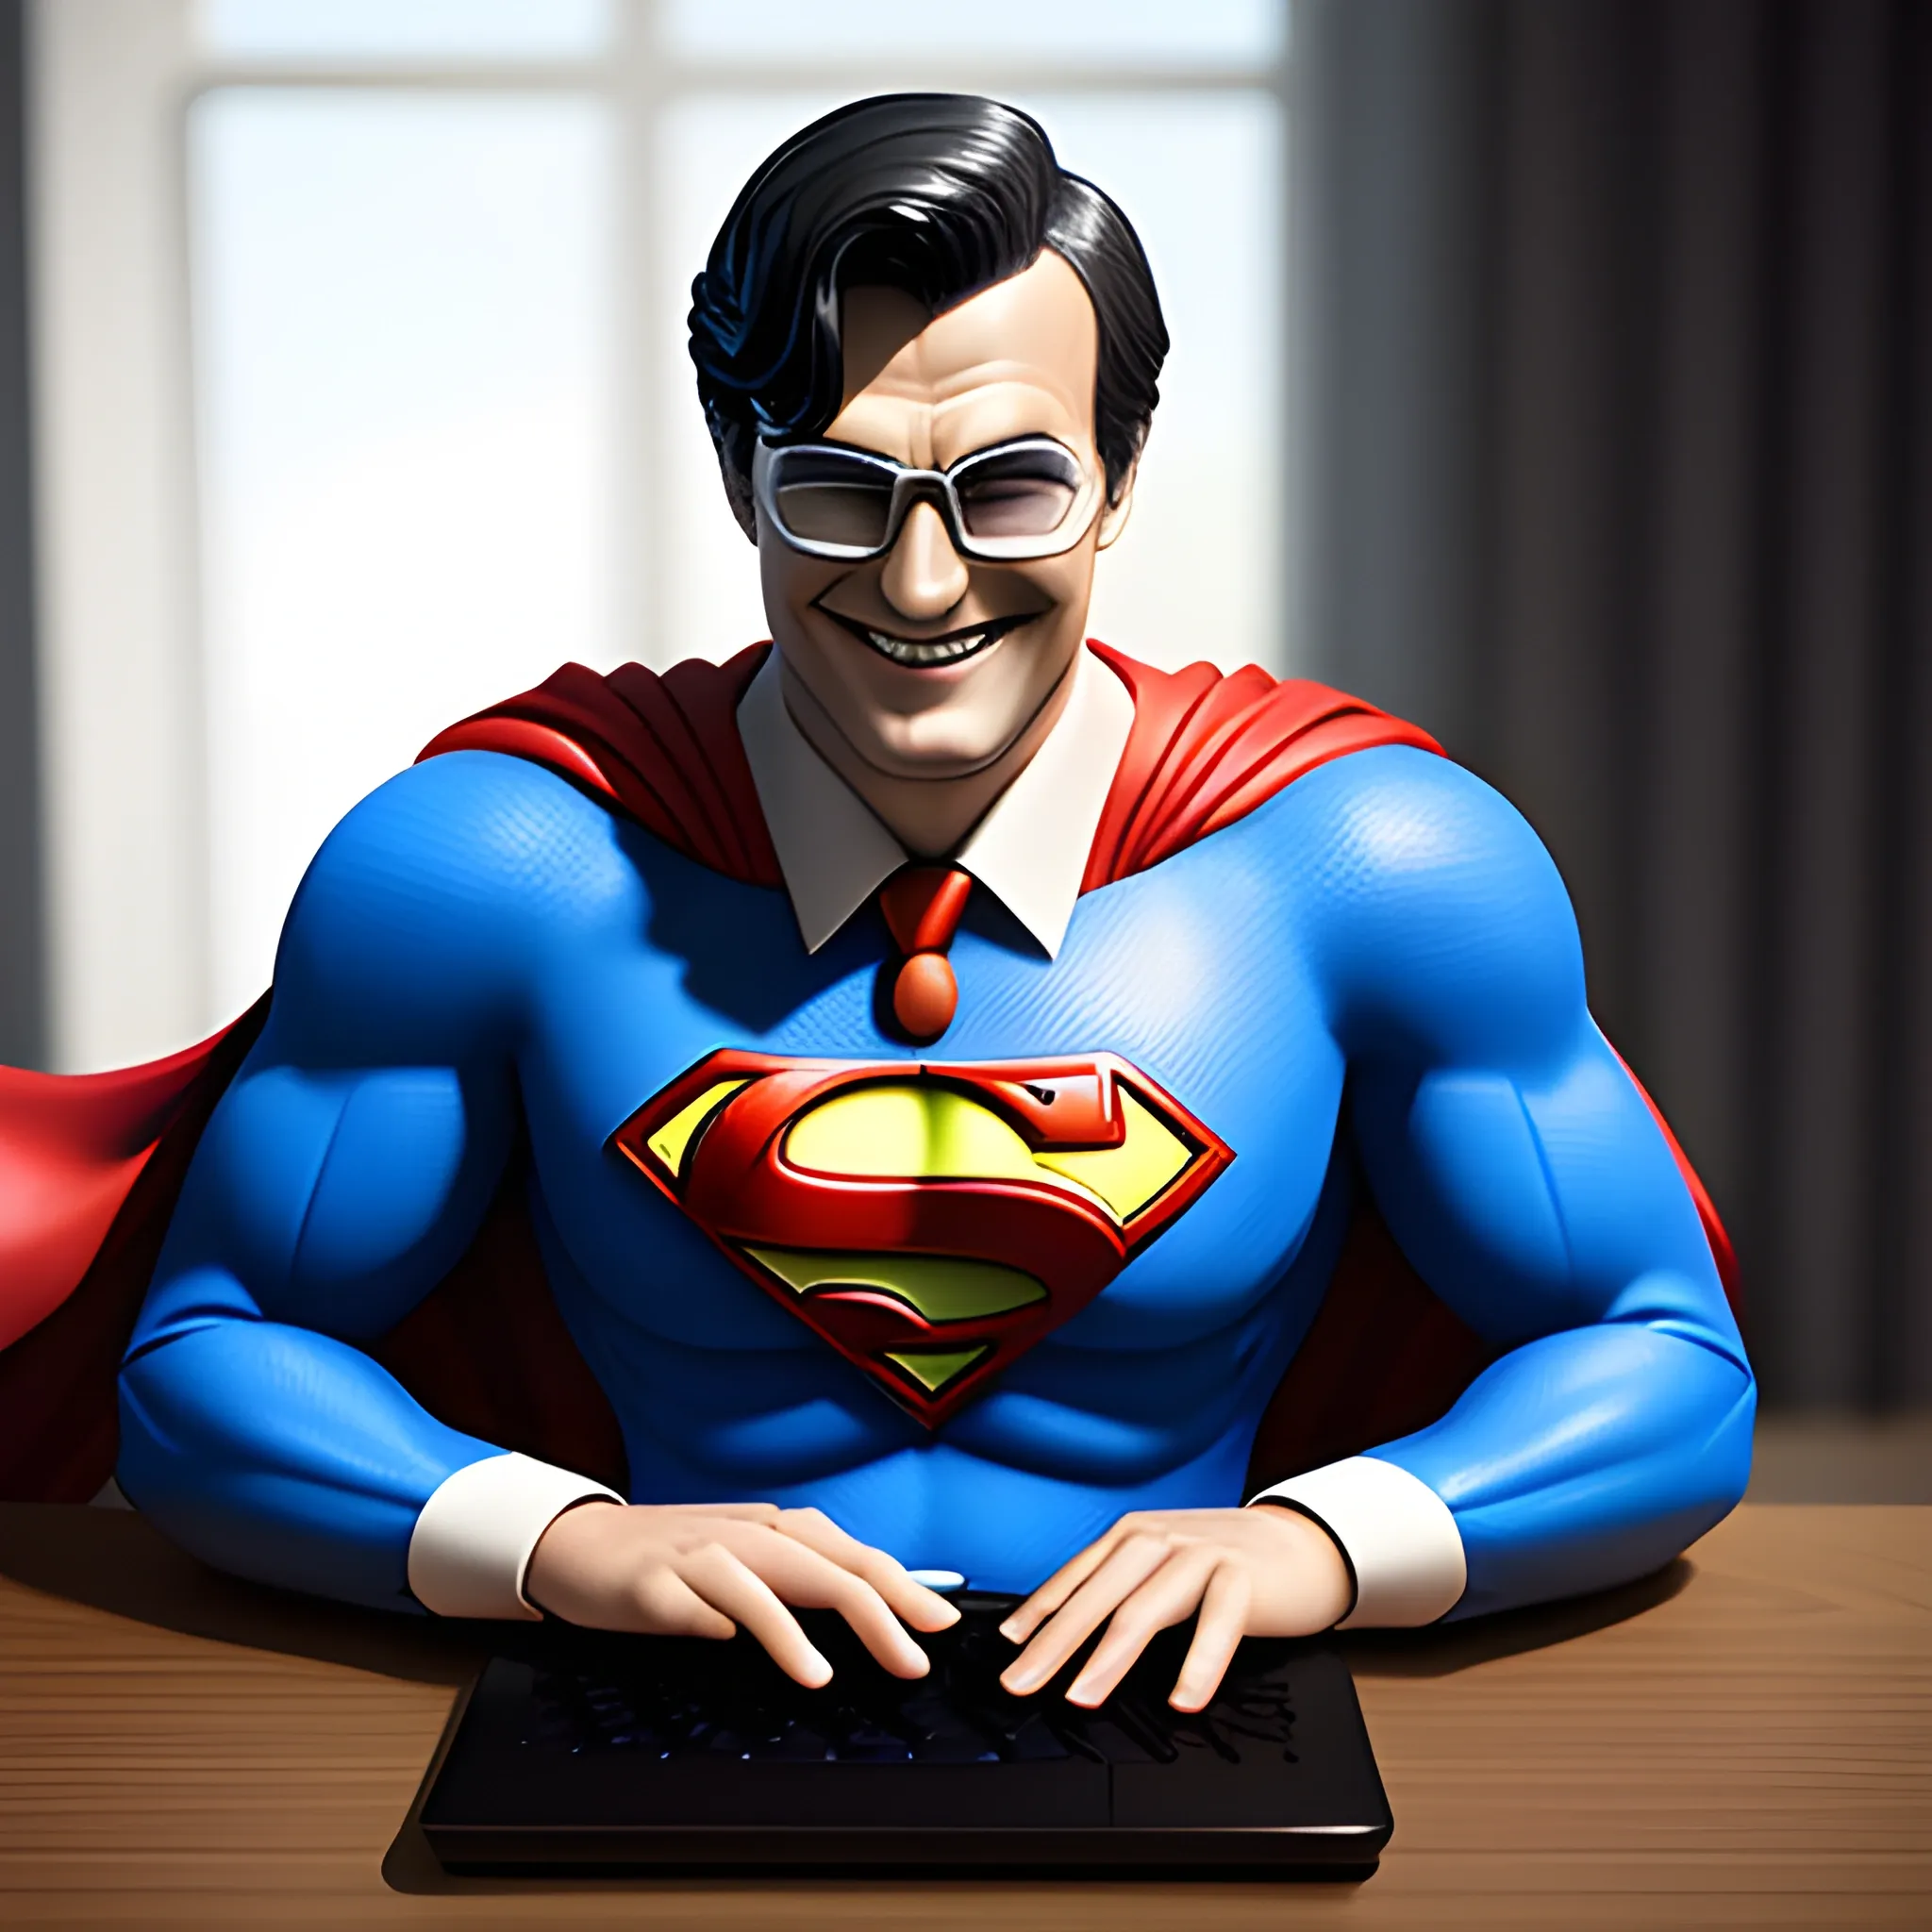 Gentleman sitting at the table, he smiles, computer on the table, gentleman in Superman suit, attractive details, realistic ultra-detailed